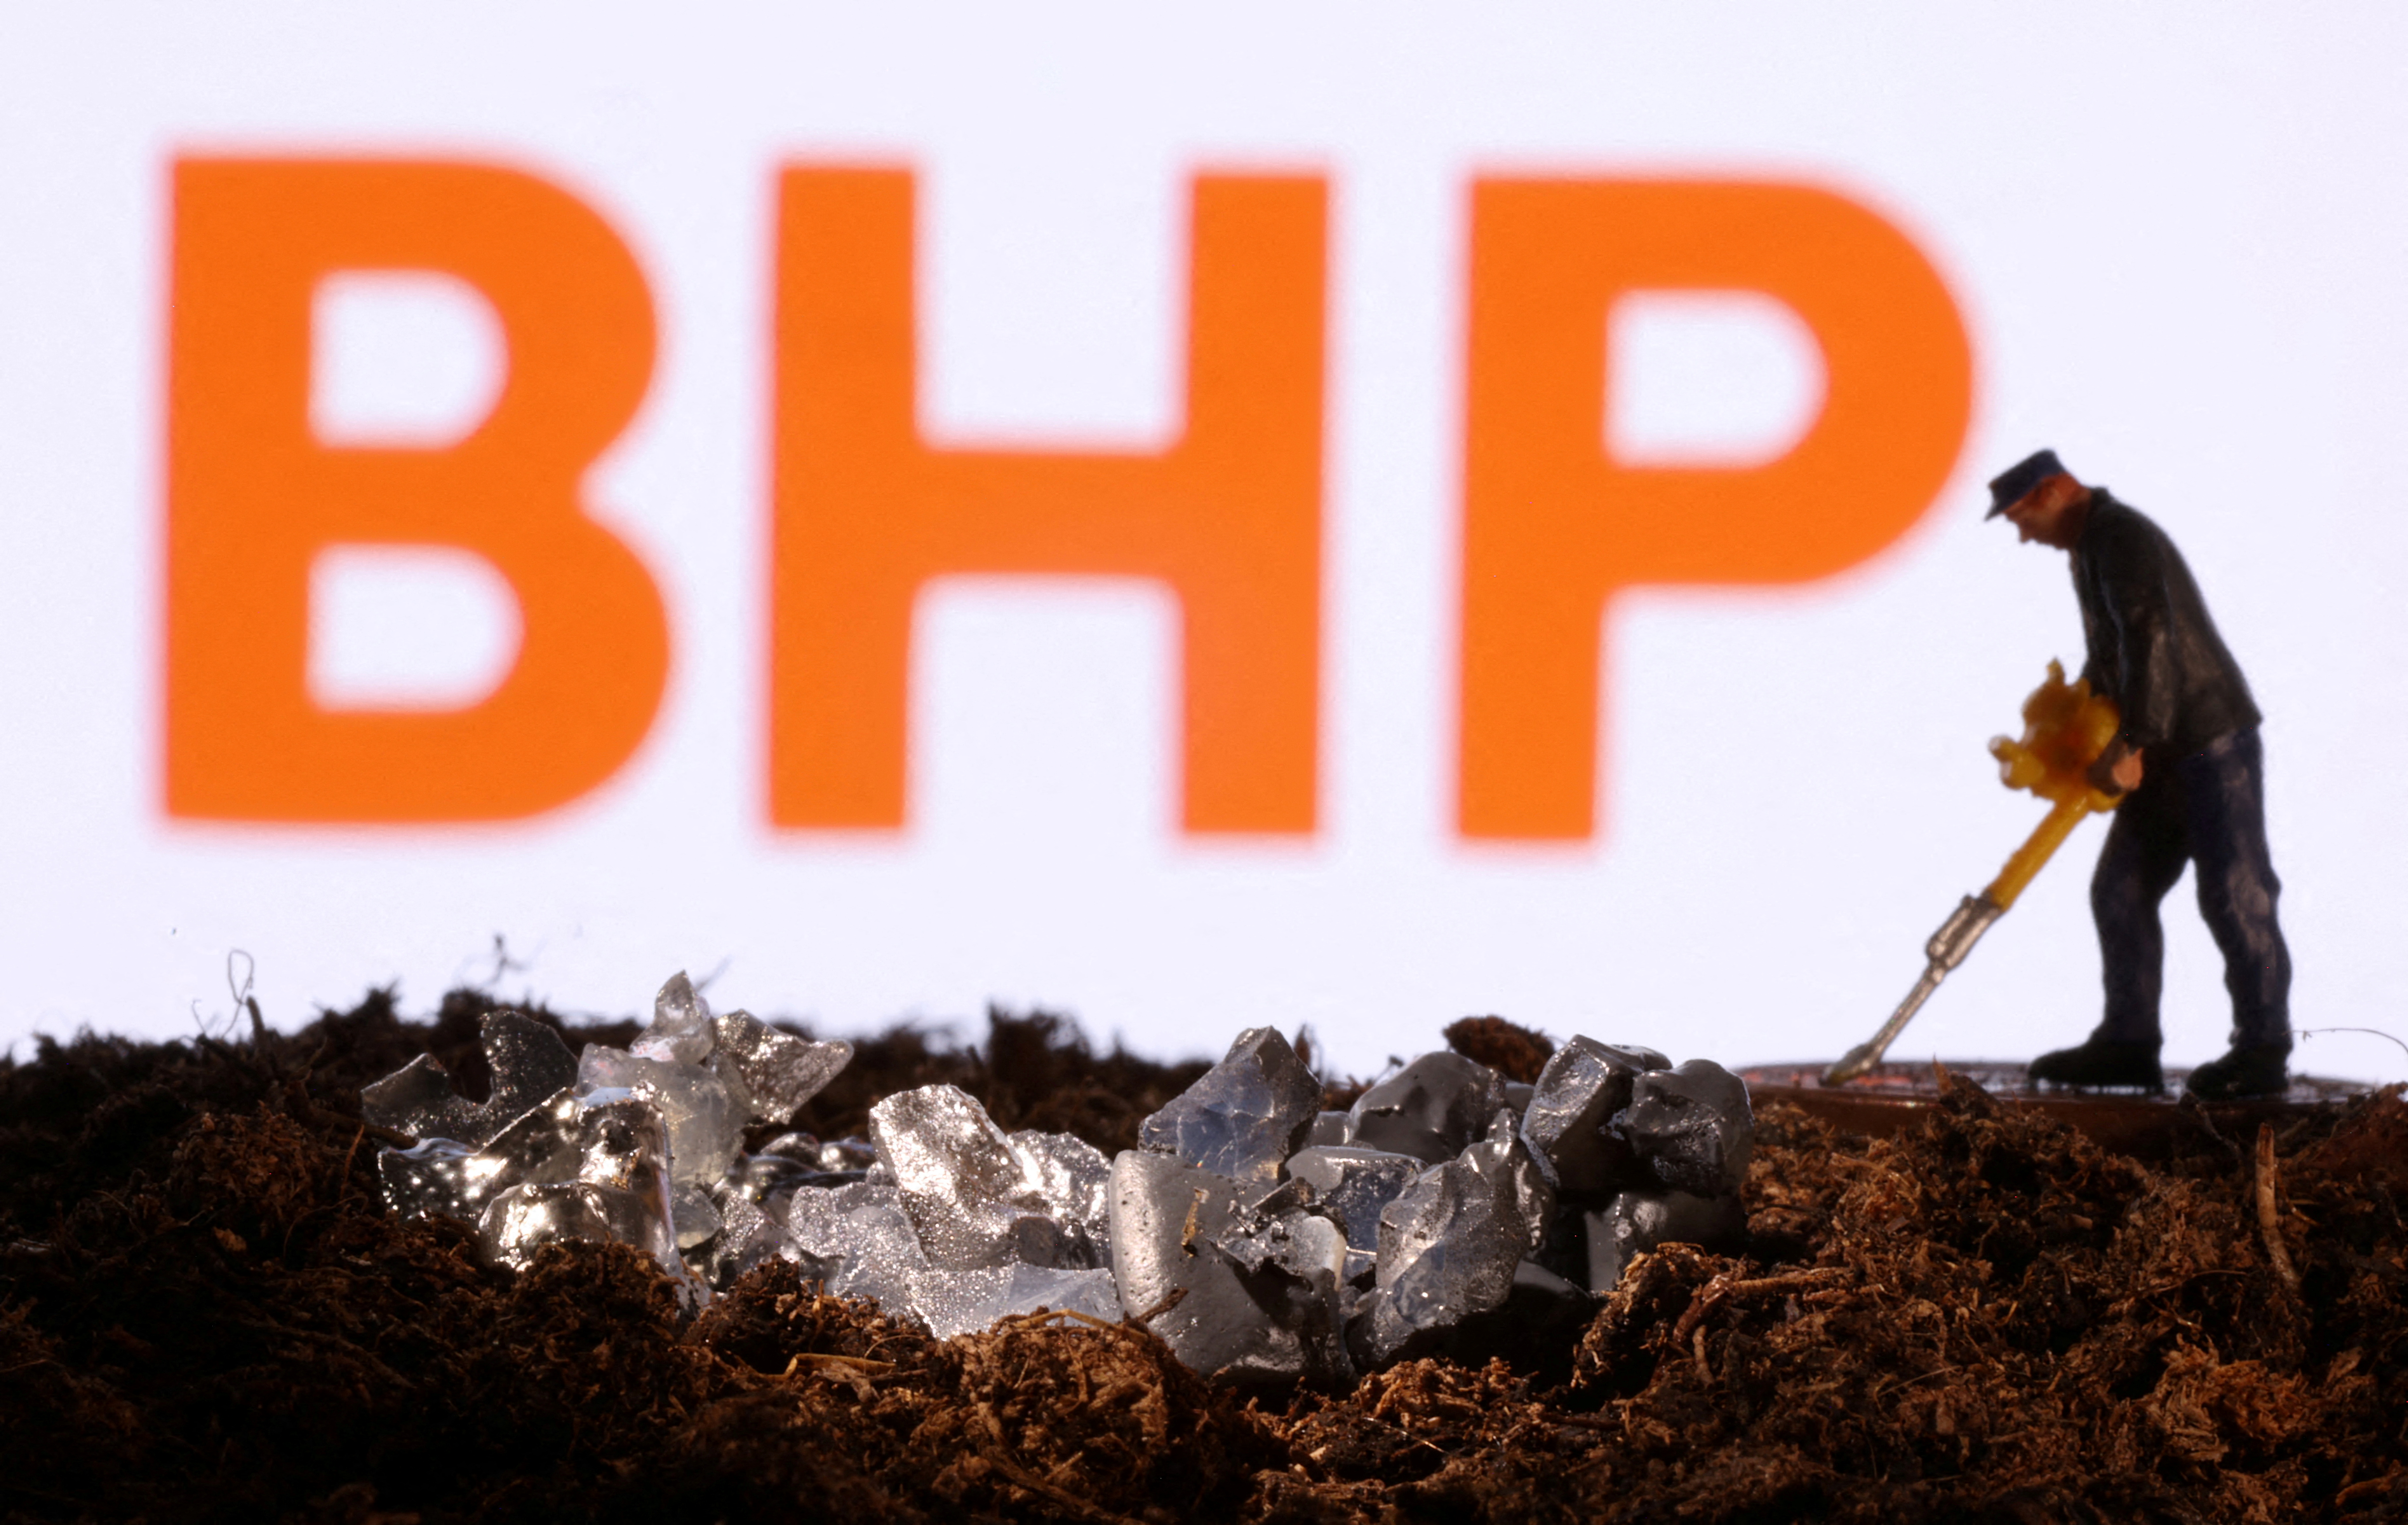 Small toy figure and mineral imitation are seen in front of the BHP logo in this illustration